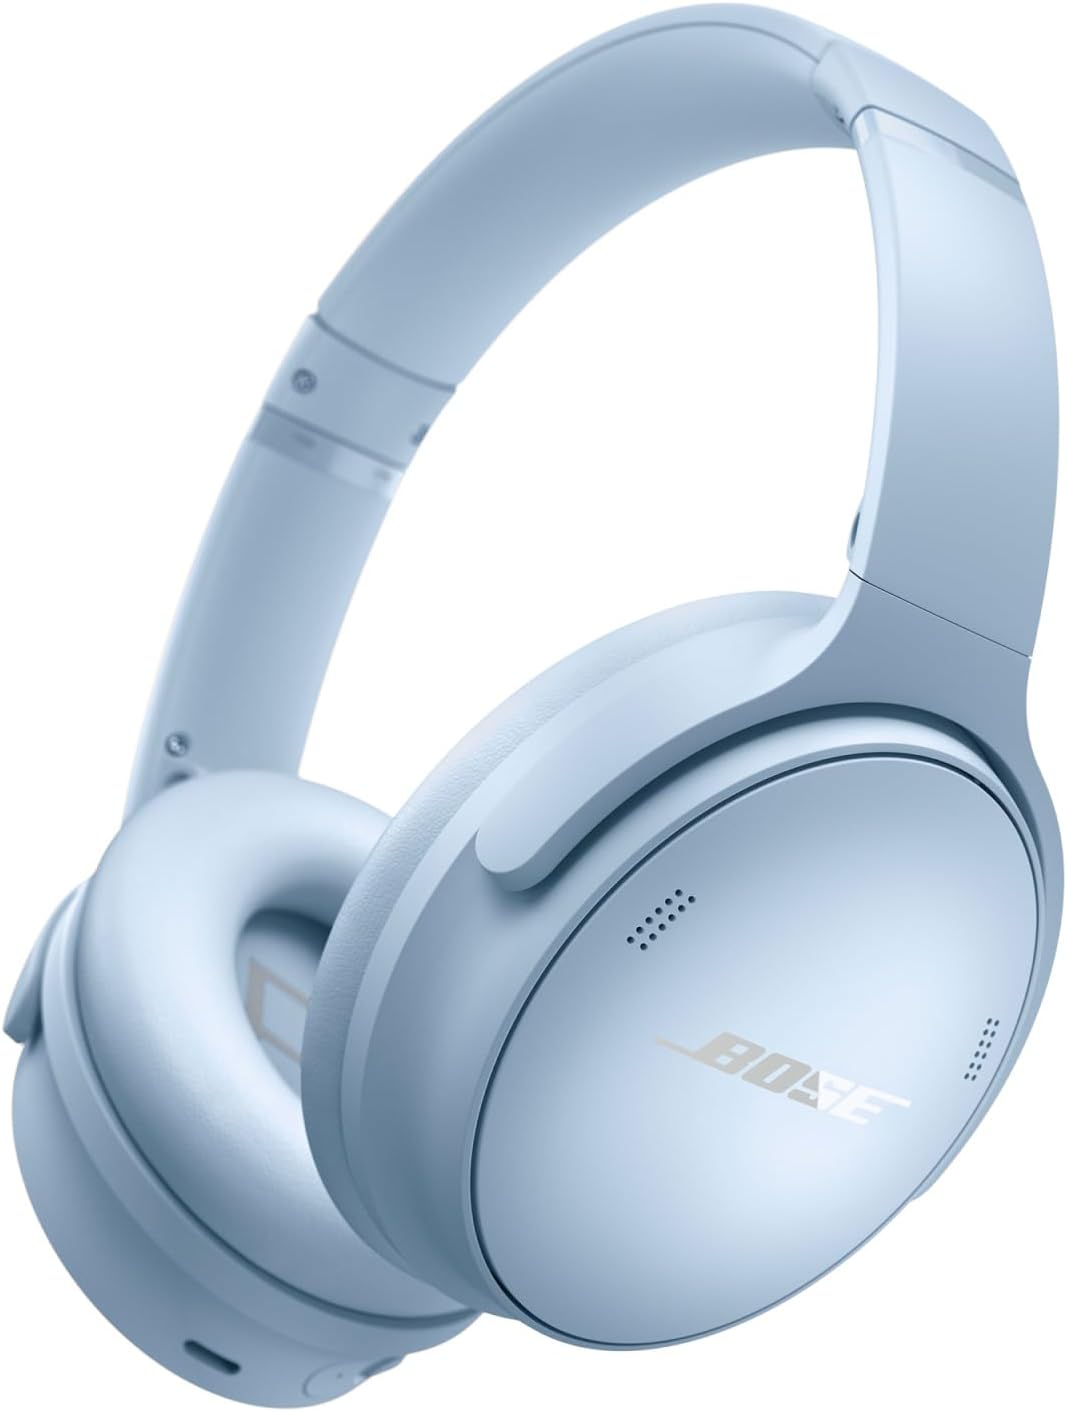 New Bose QuietComfort Wireless Noise Cancelling Headphones, Bluetooth Over Ear Headphones with Up To 24 Hours of Battery Life, Moonstone Blue